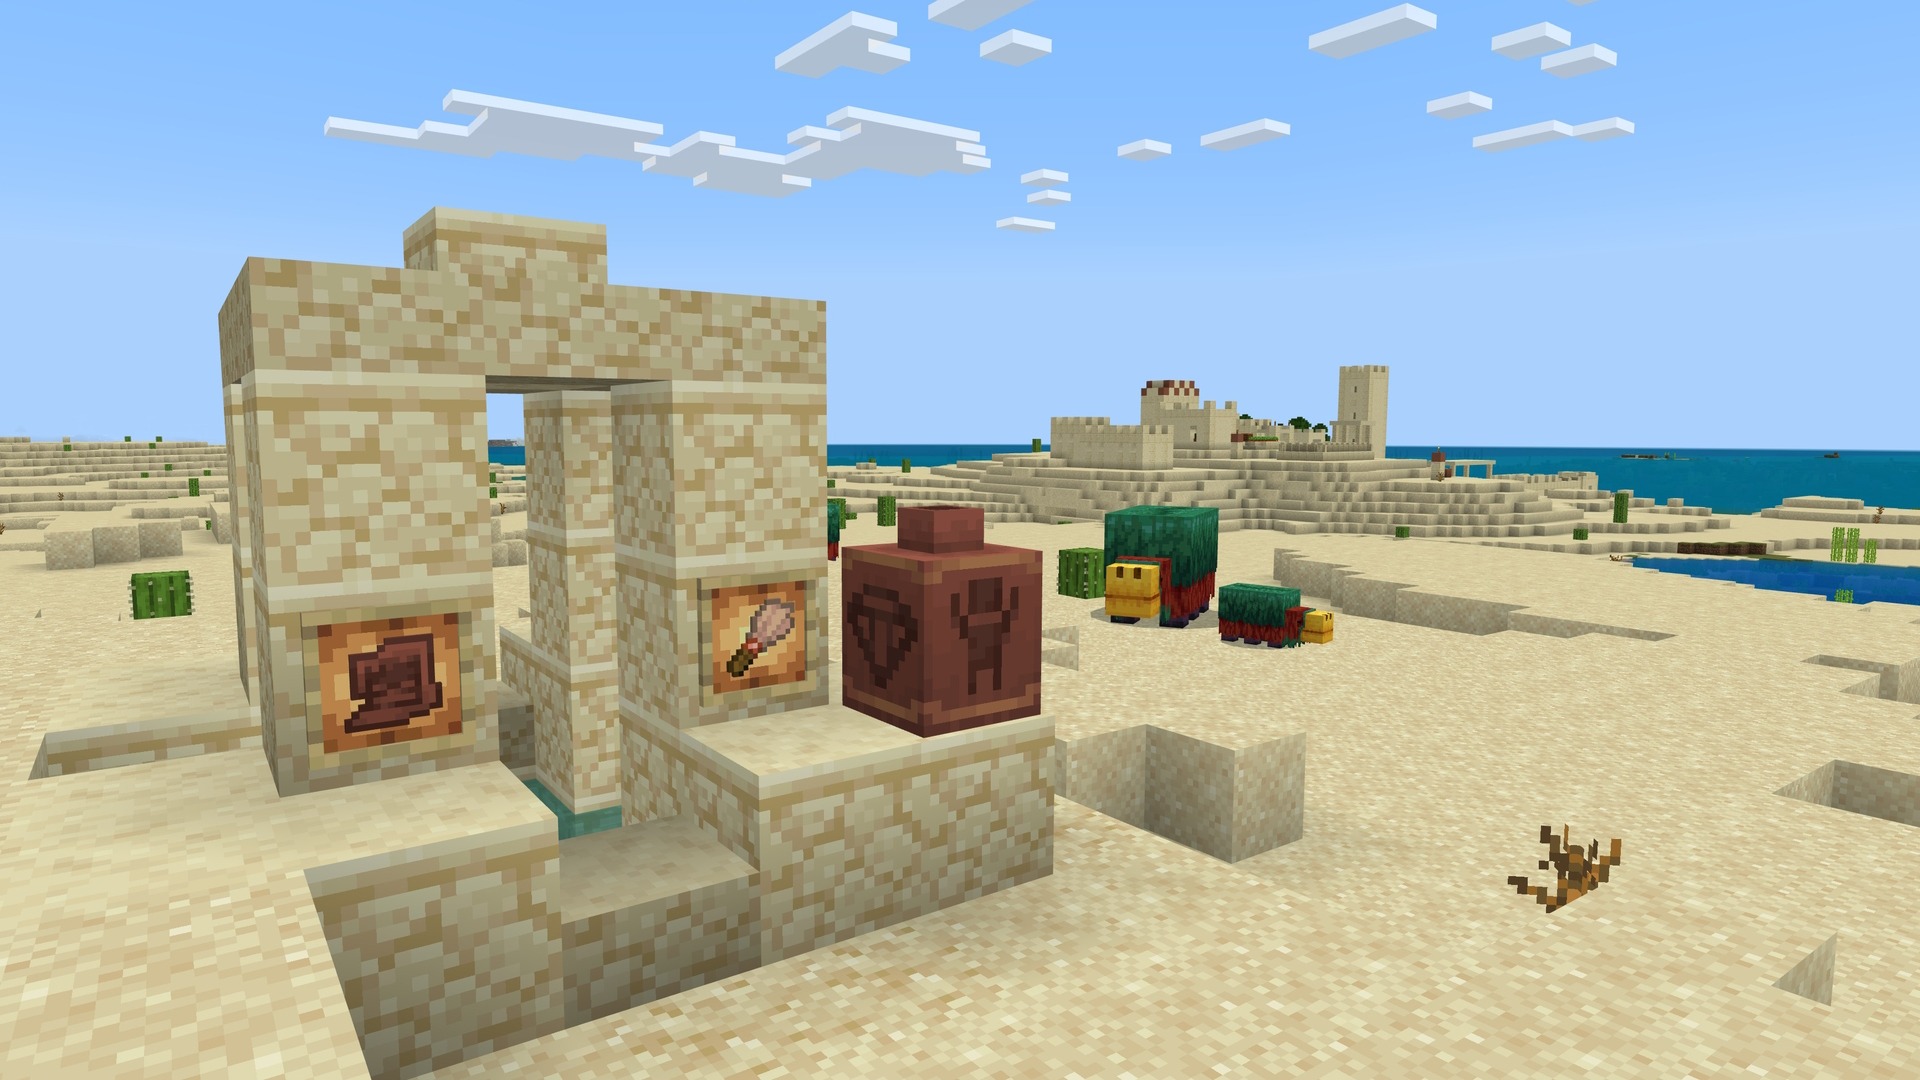 A Minecraft screenshot featuring the sniffer and a snifflet, and items related to archaeology including decorated pots, set in front of a desert well.